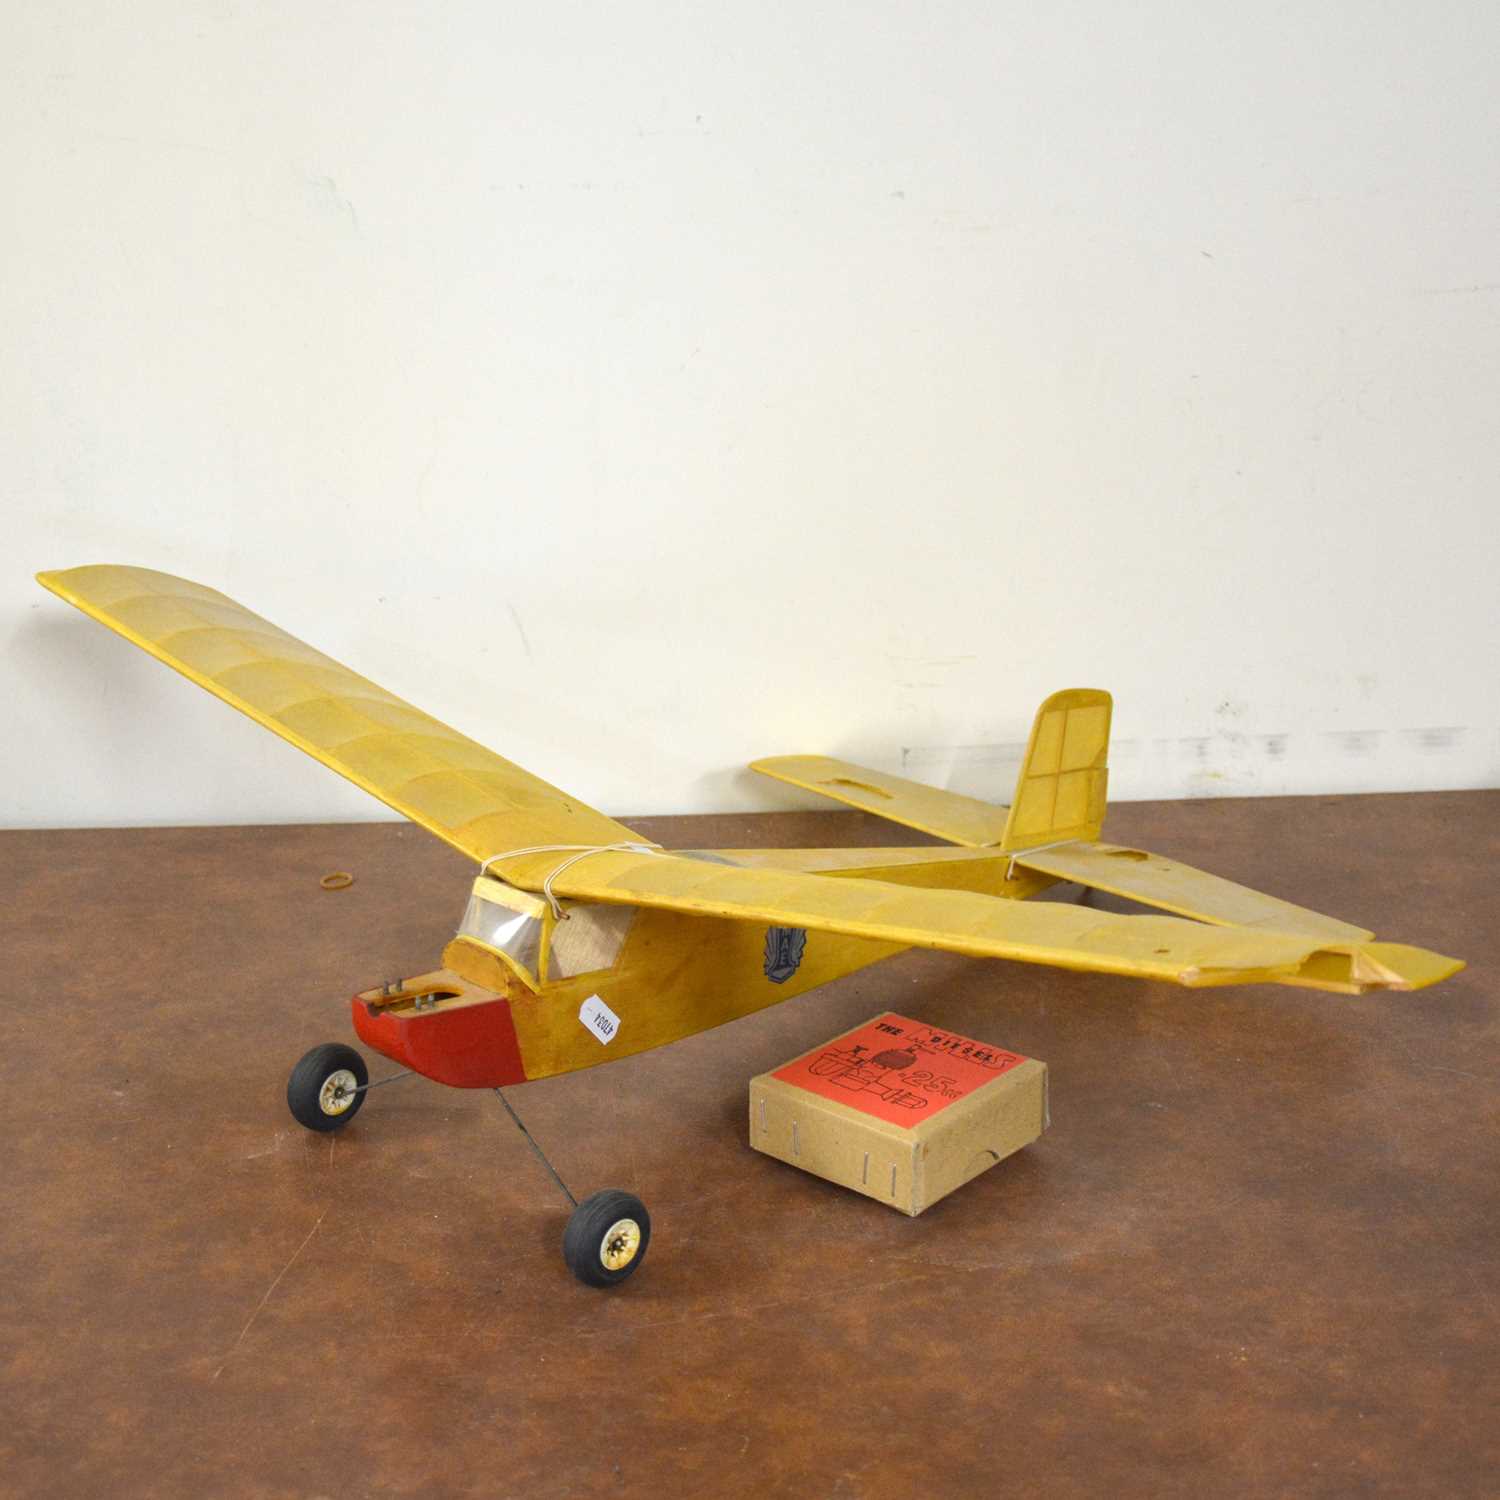 Lot 497 - Yellow FF model aircraft, with Dave Banks Mills engine